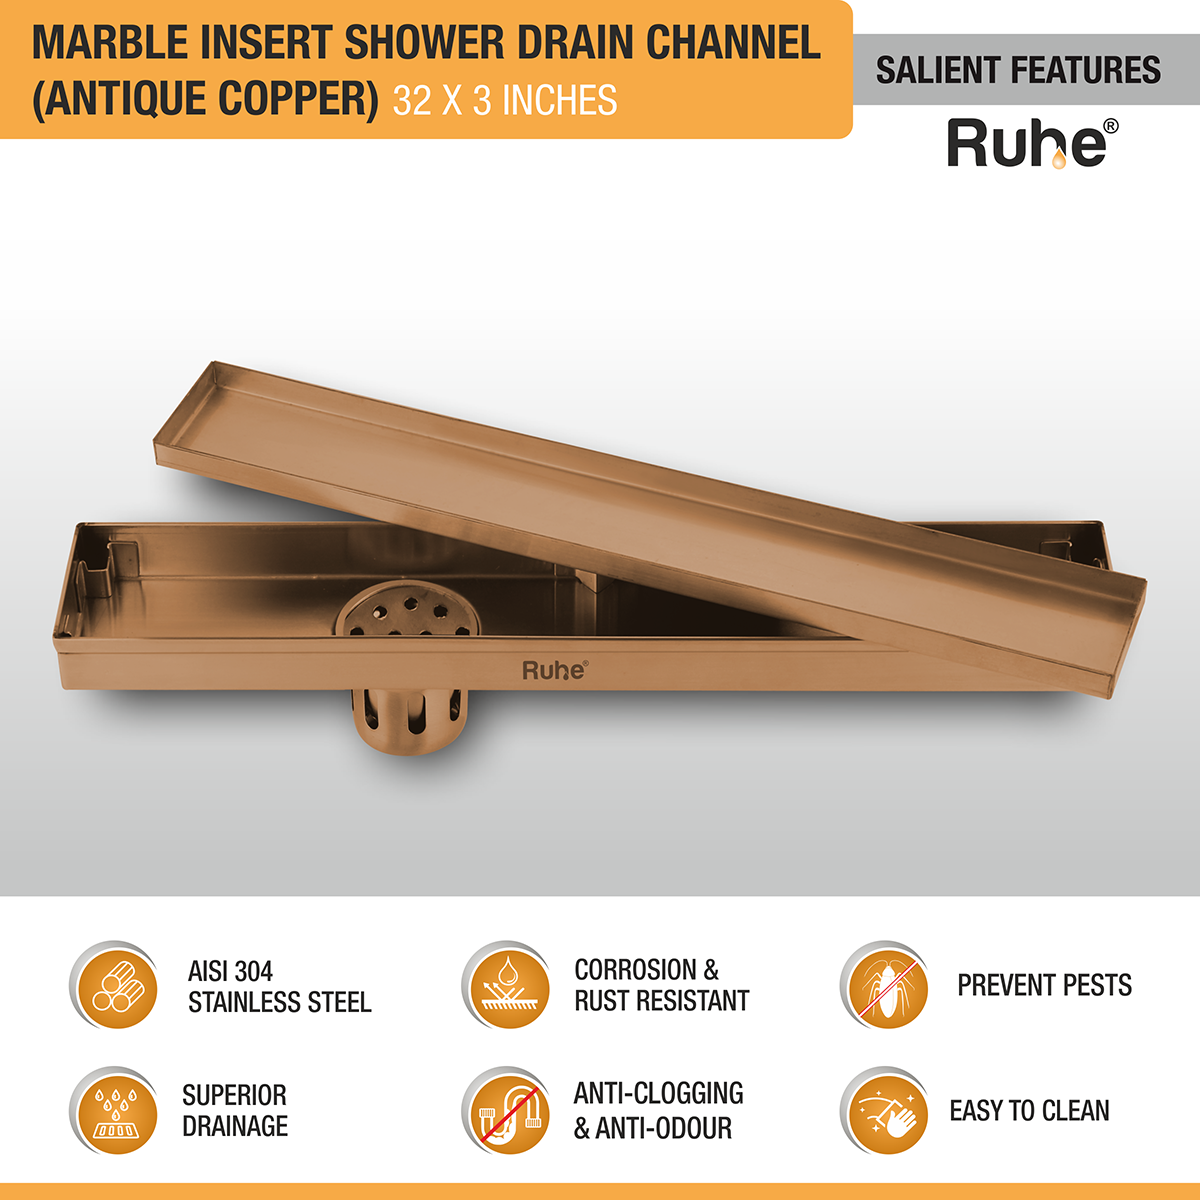 Marble Insert Shower Drain Channel (32 x 3 Inches) ROSE GOLD PVD Coated features and benefits